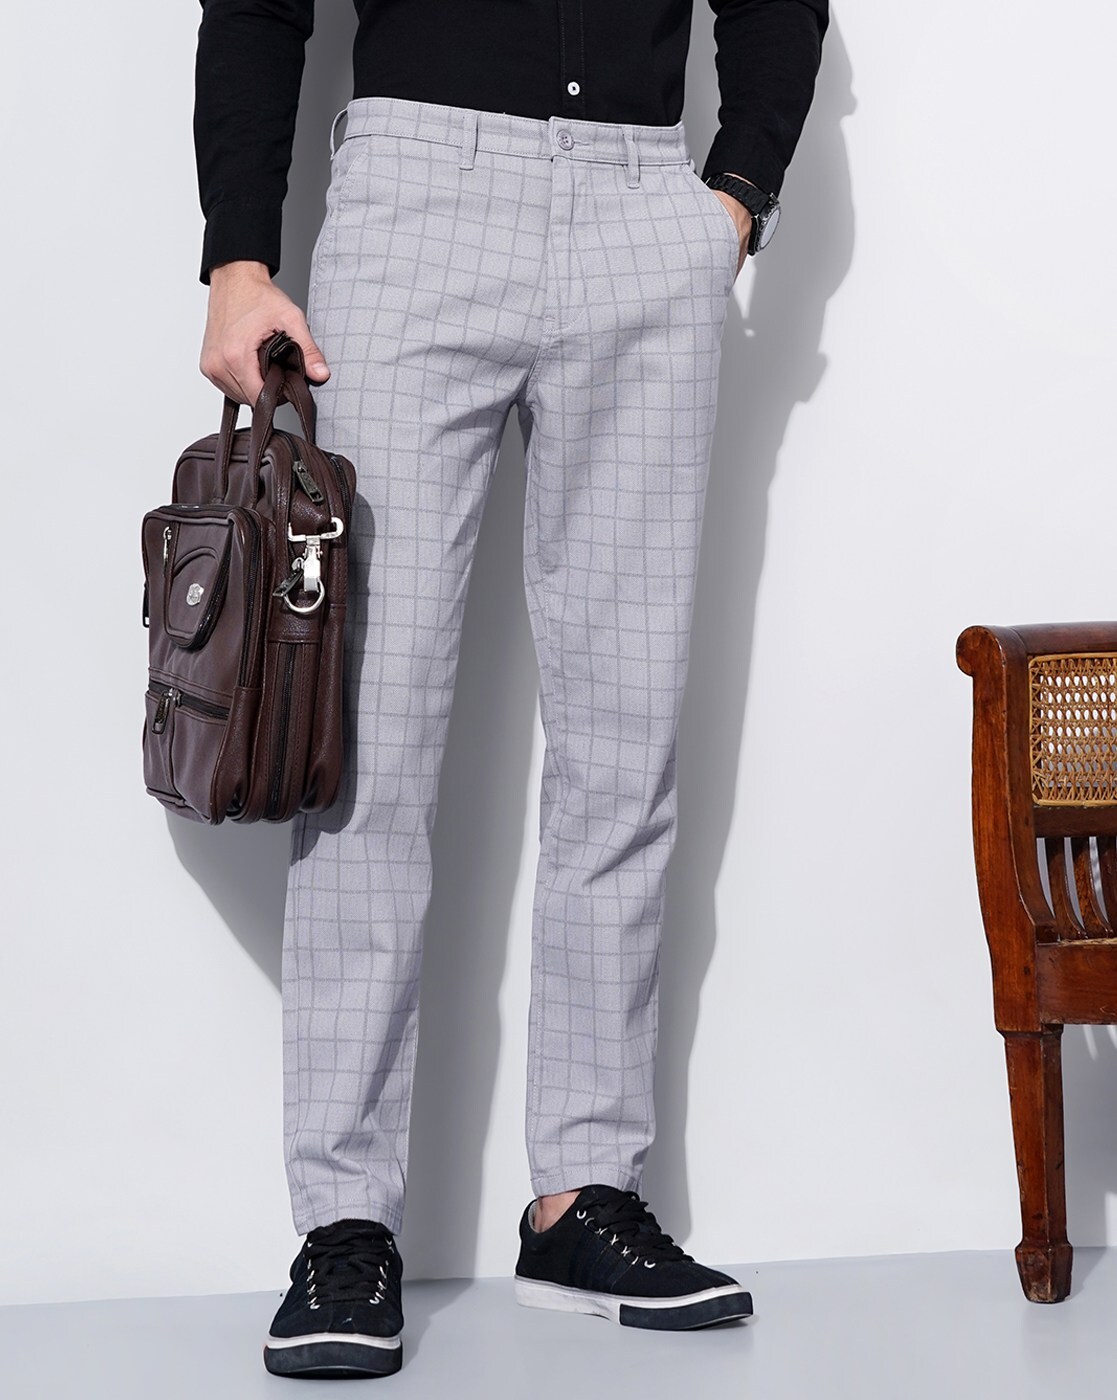 Men's Plaid Dress Pants Tapered Leg Chino Checkered Casual Business Suit  Trousers Skinny Stretchy Slim Fit Trousers - Walmart.com